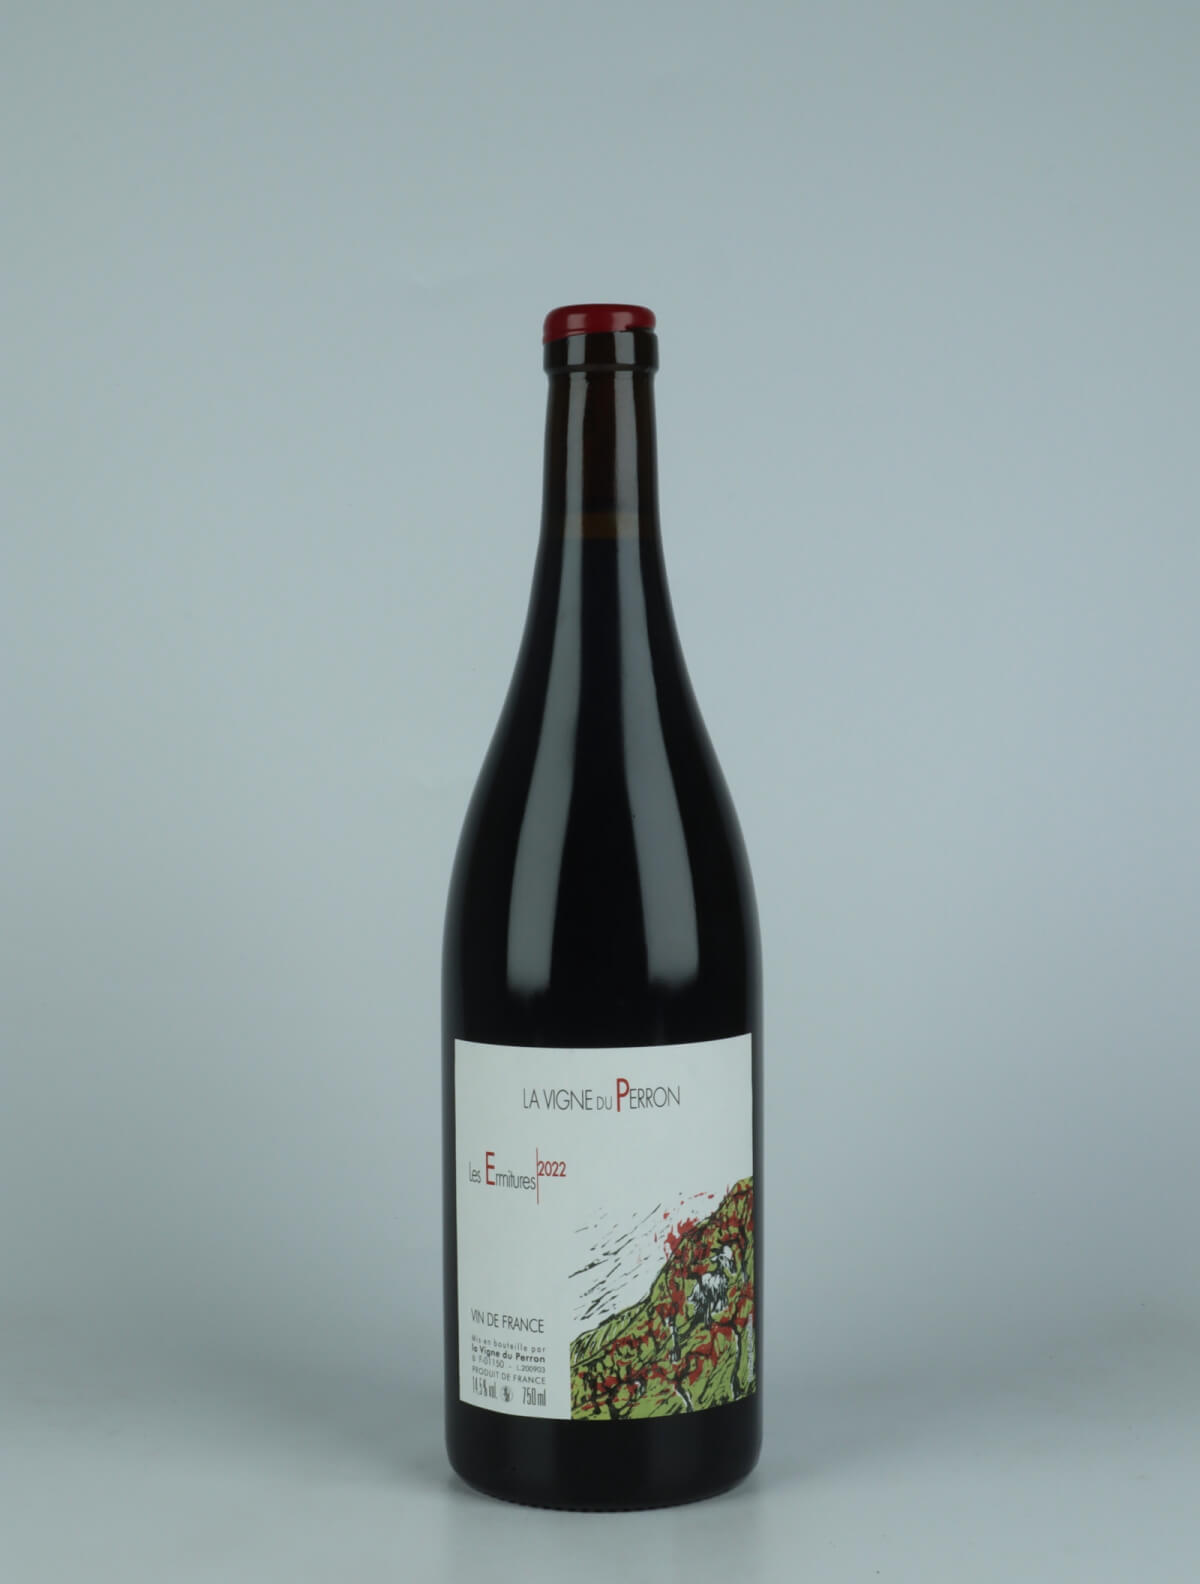 A bottle 2022 Les Ermitures Red wine from Domaine du Perron, Bugey in France